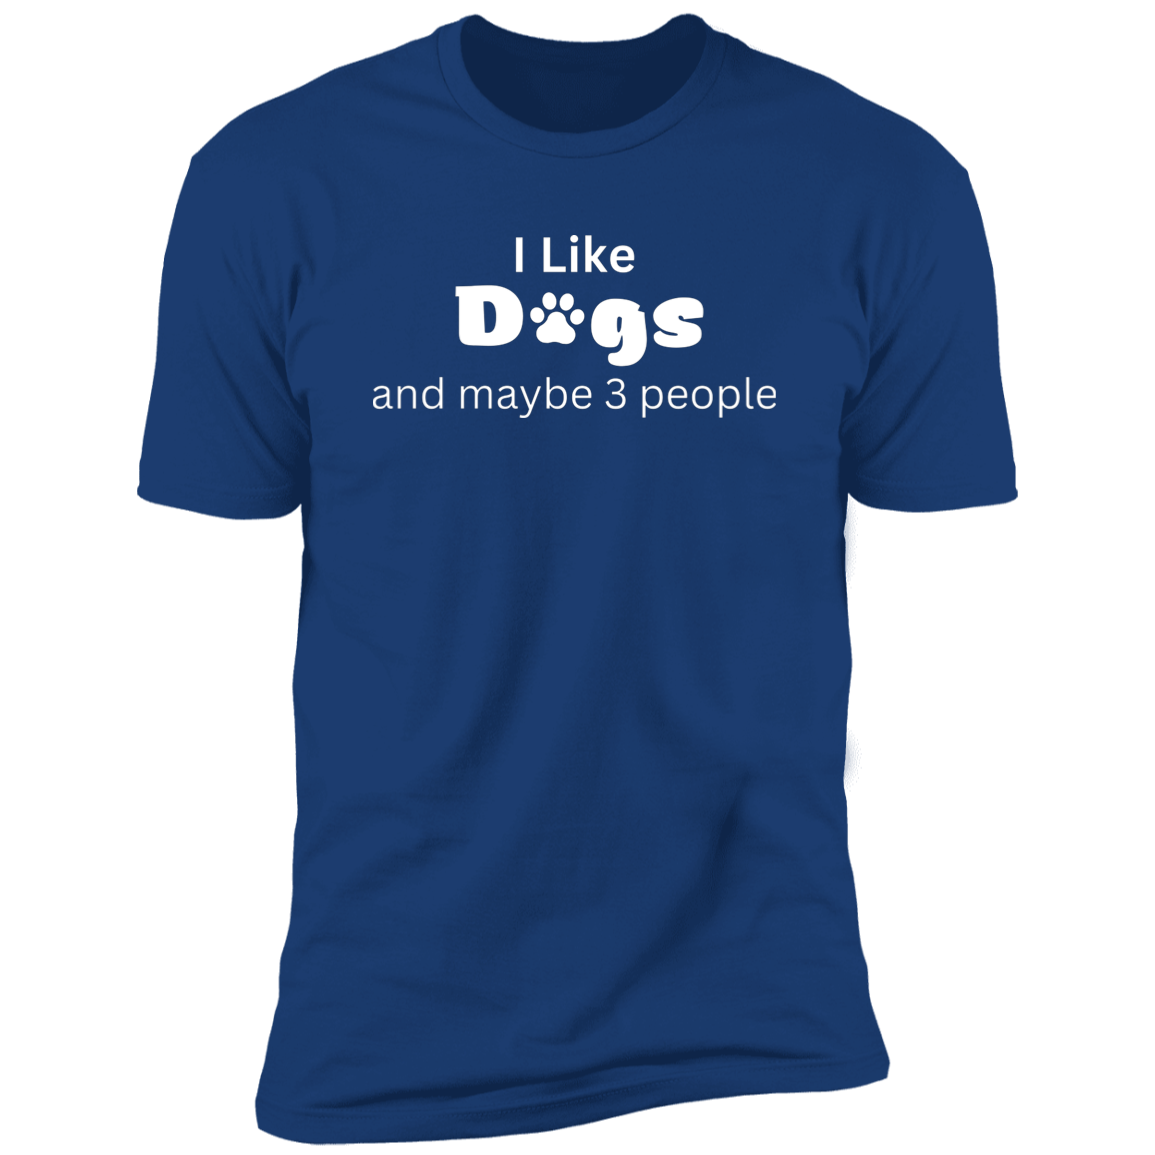 I Like Dogs & Maybe 3 People